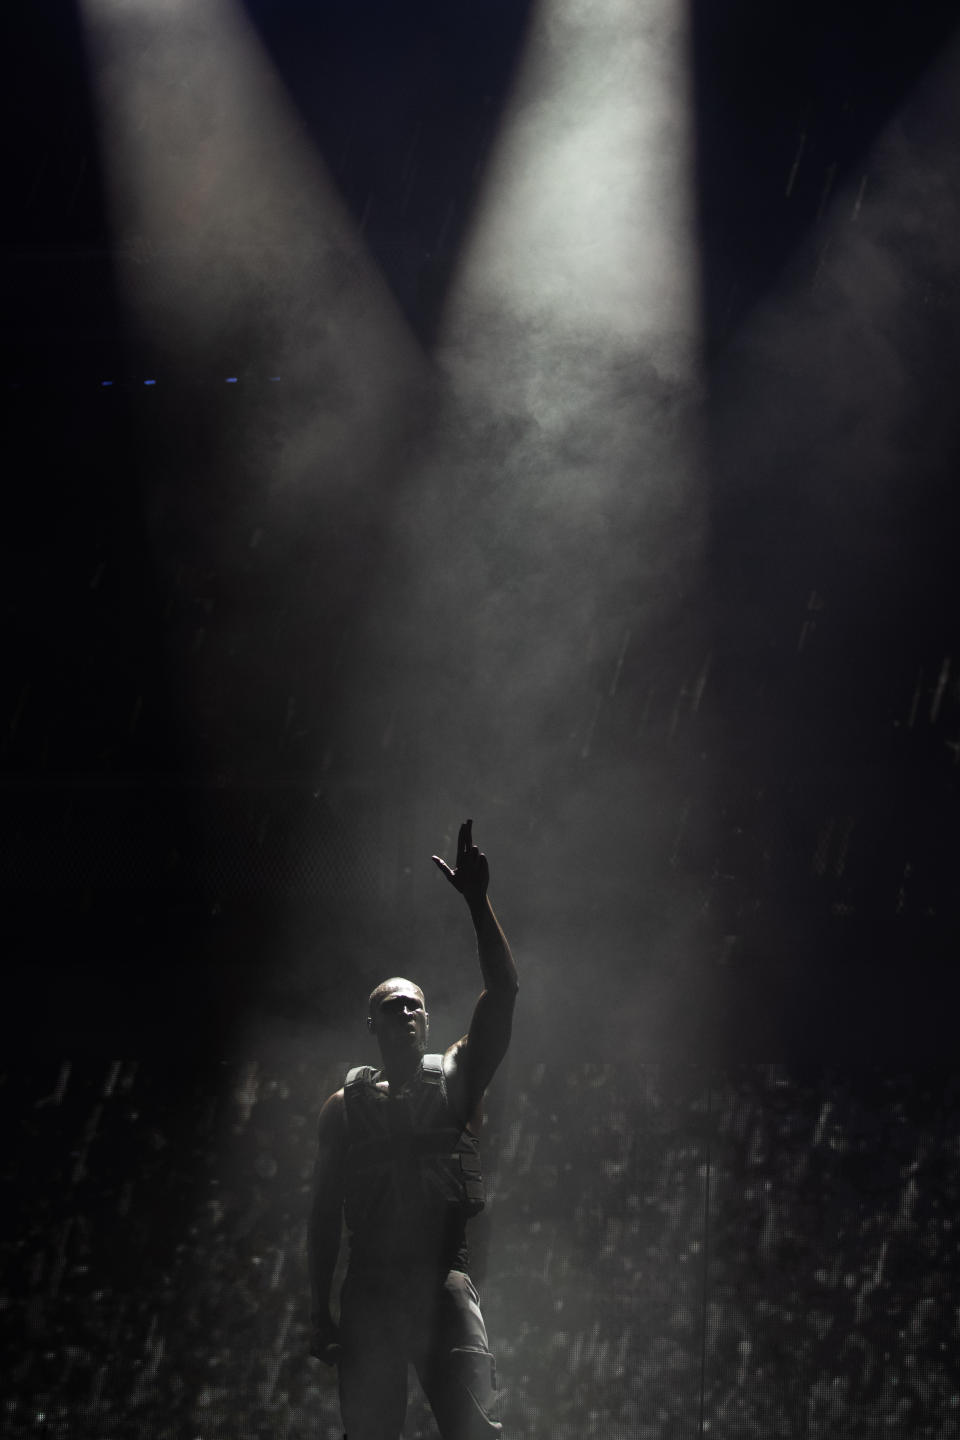 Stormzy performing on the Pyramid Stage during the Glastonbury Festival at Worthy Farm in Pilton, Somerset.